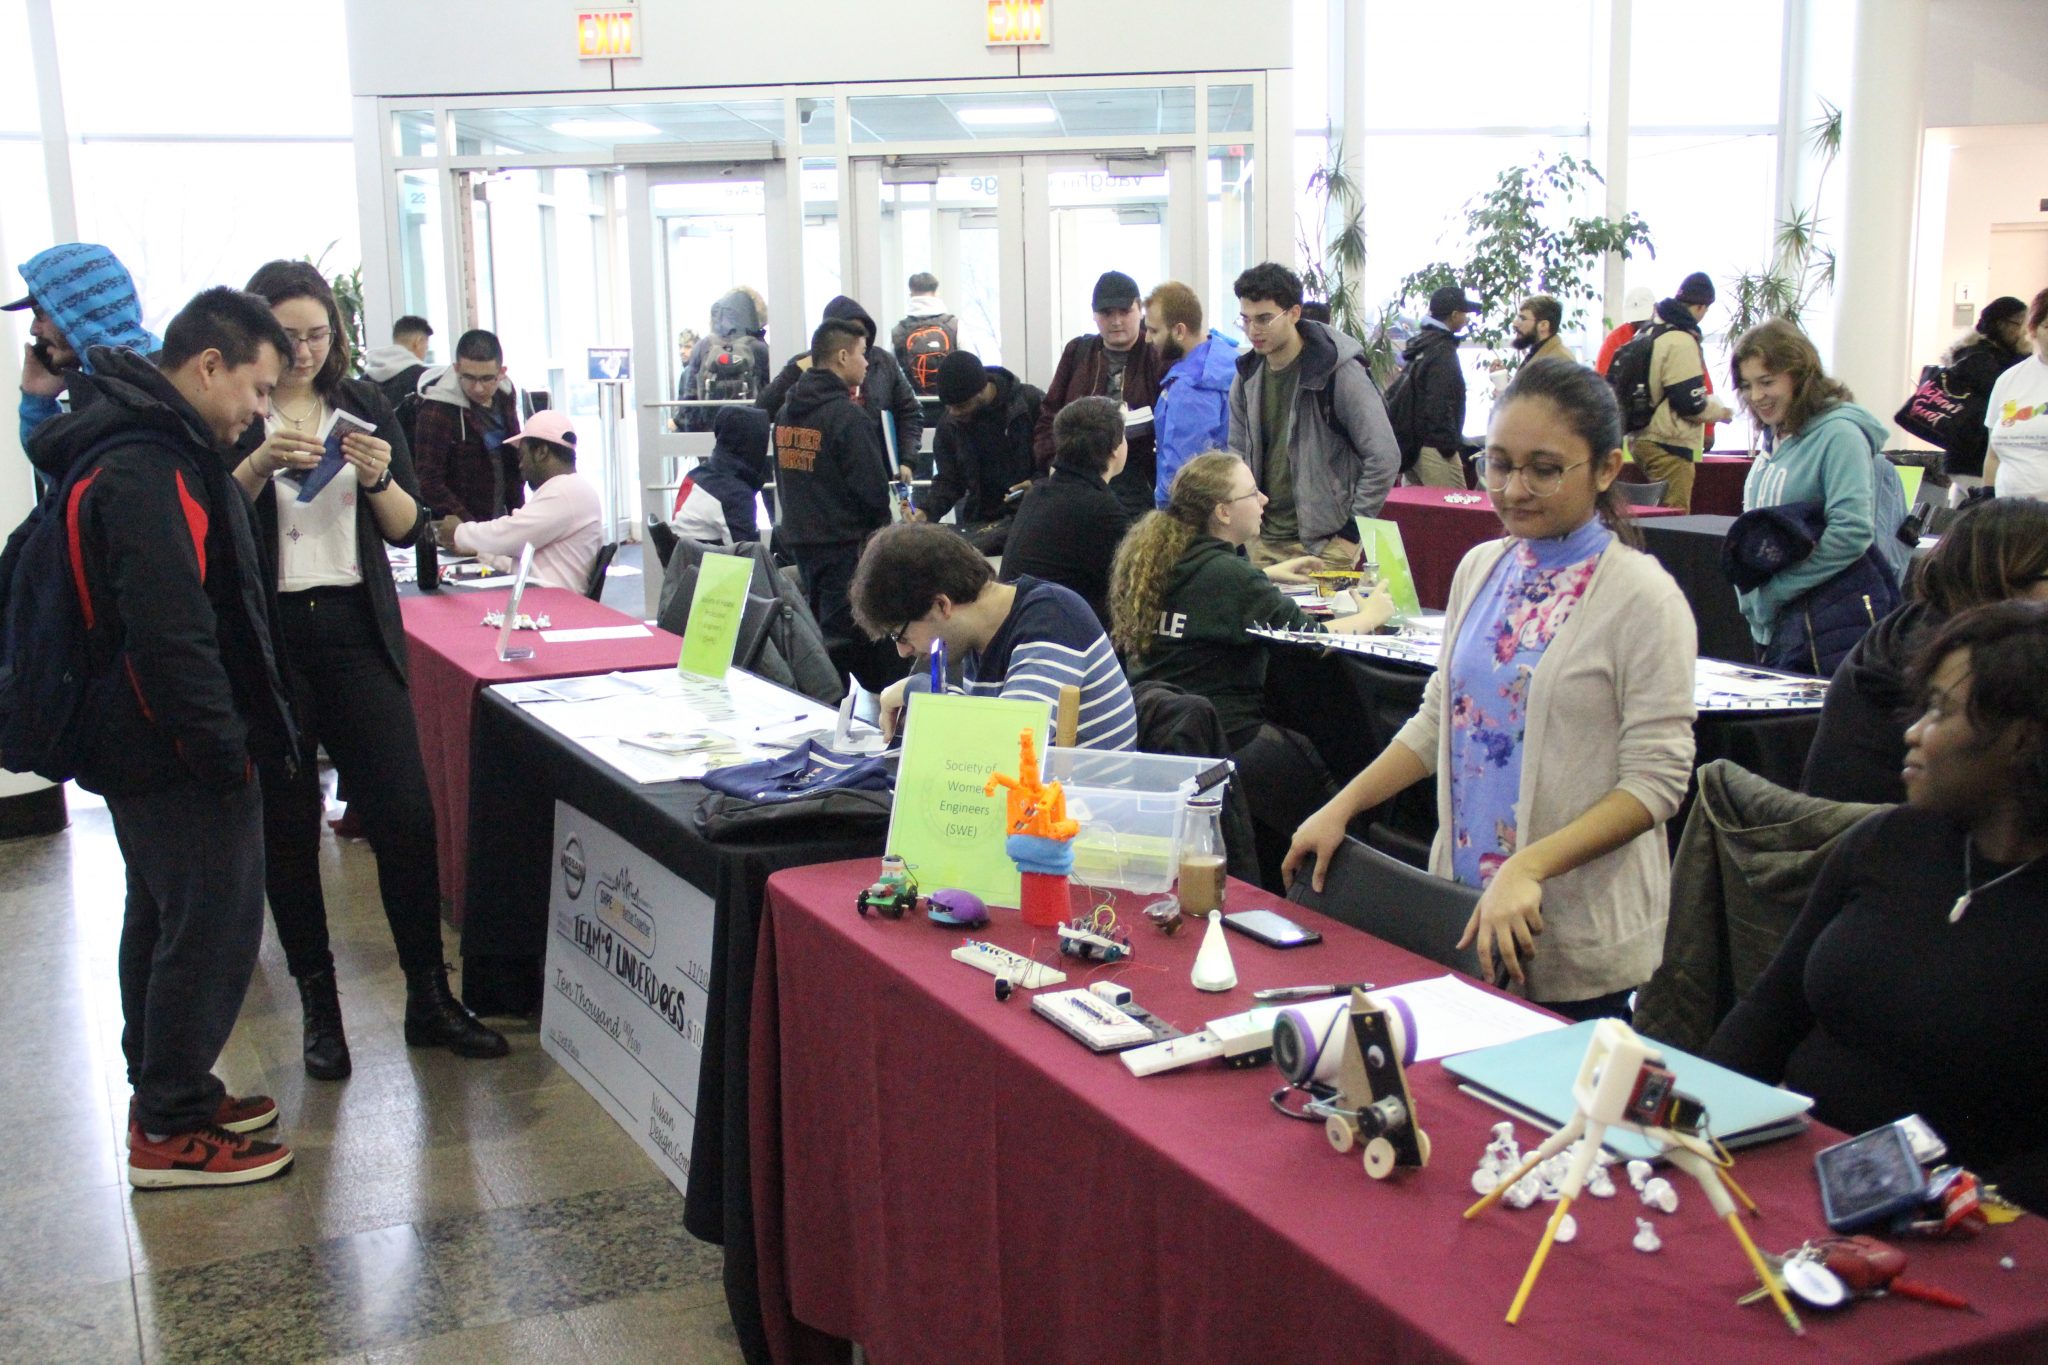 Spring Club Fair Attracts Student Interest On Campus